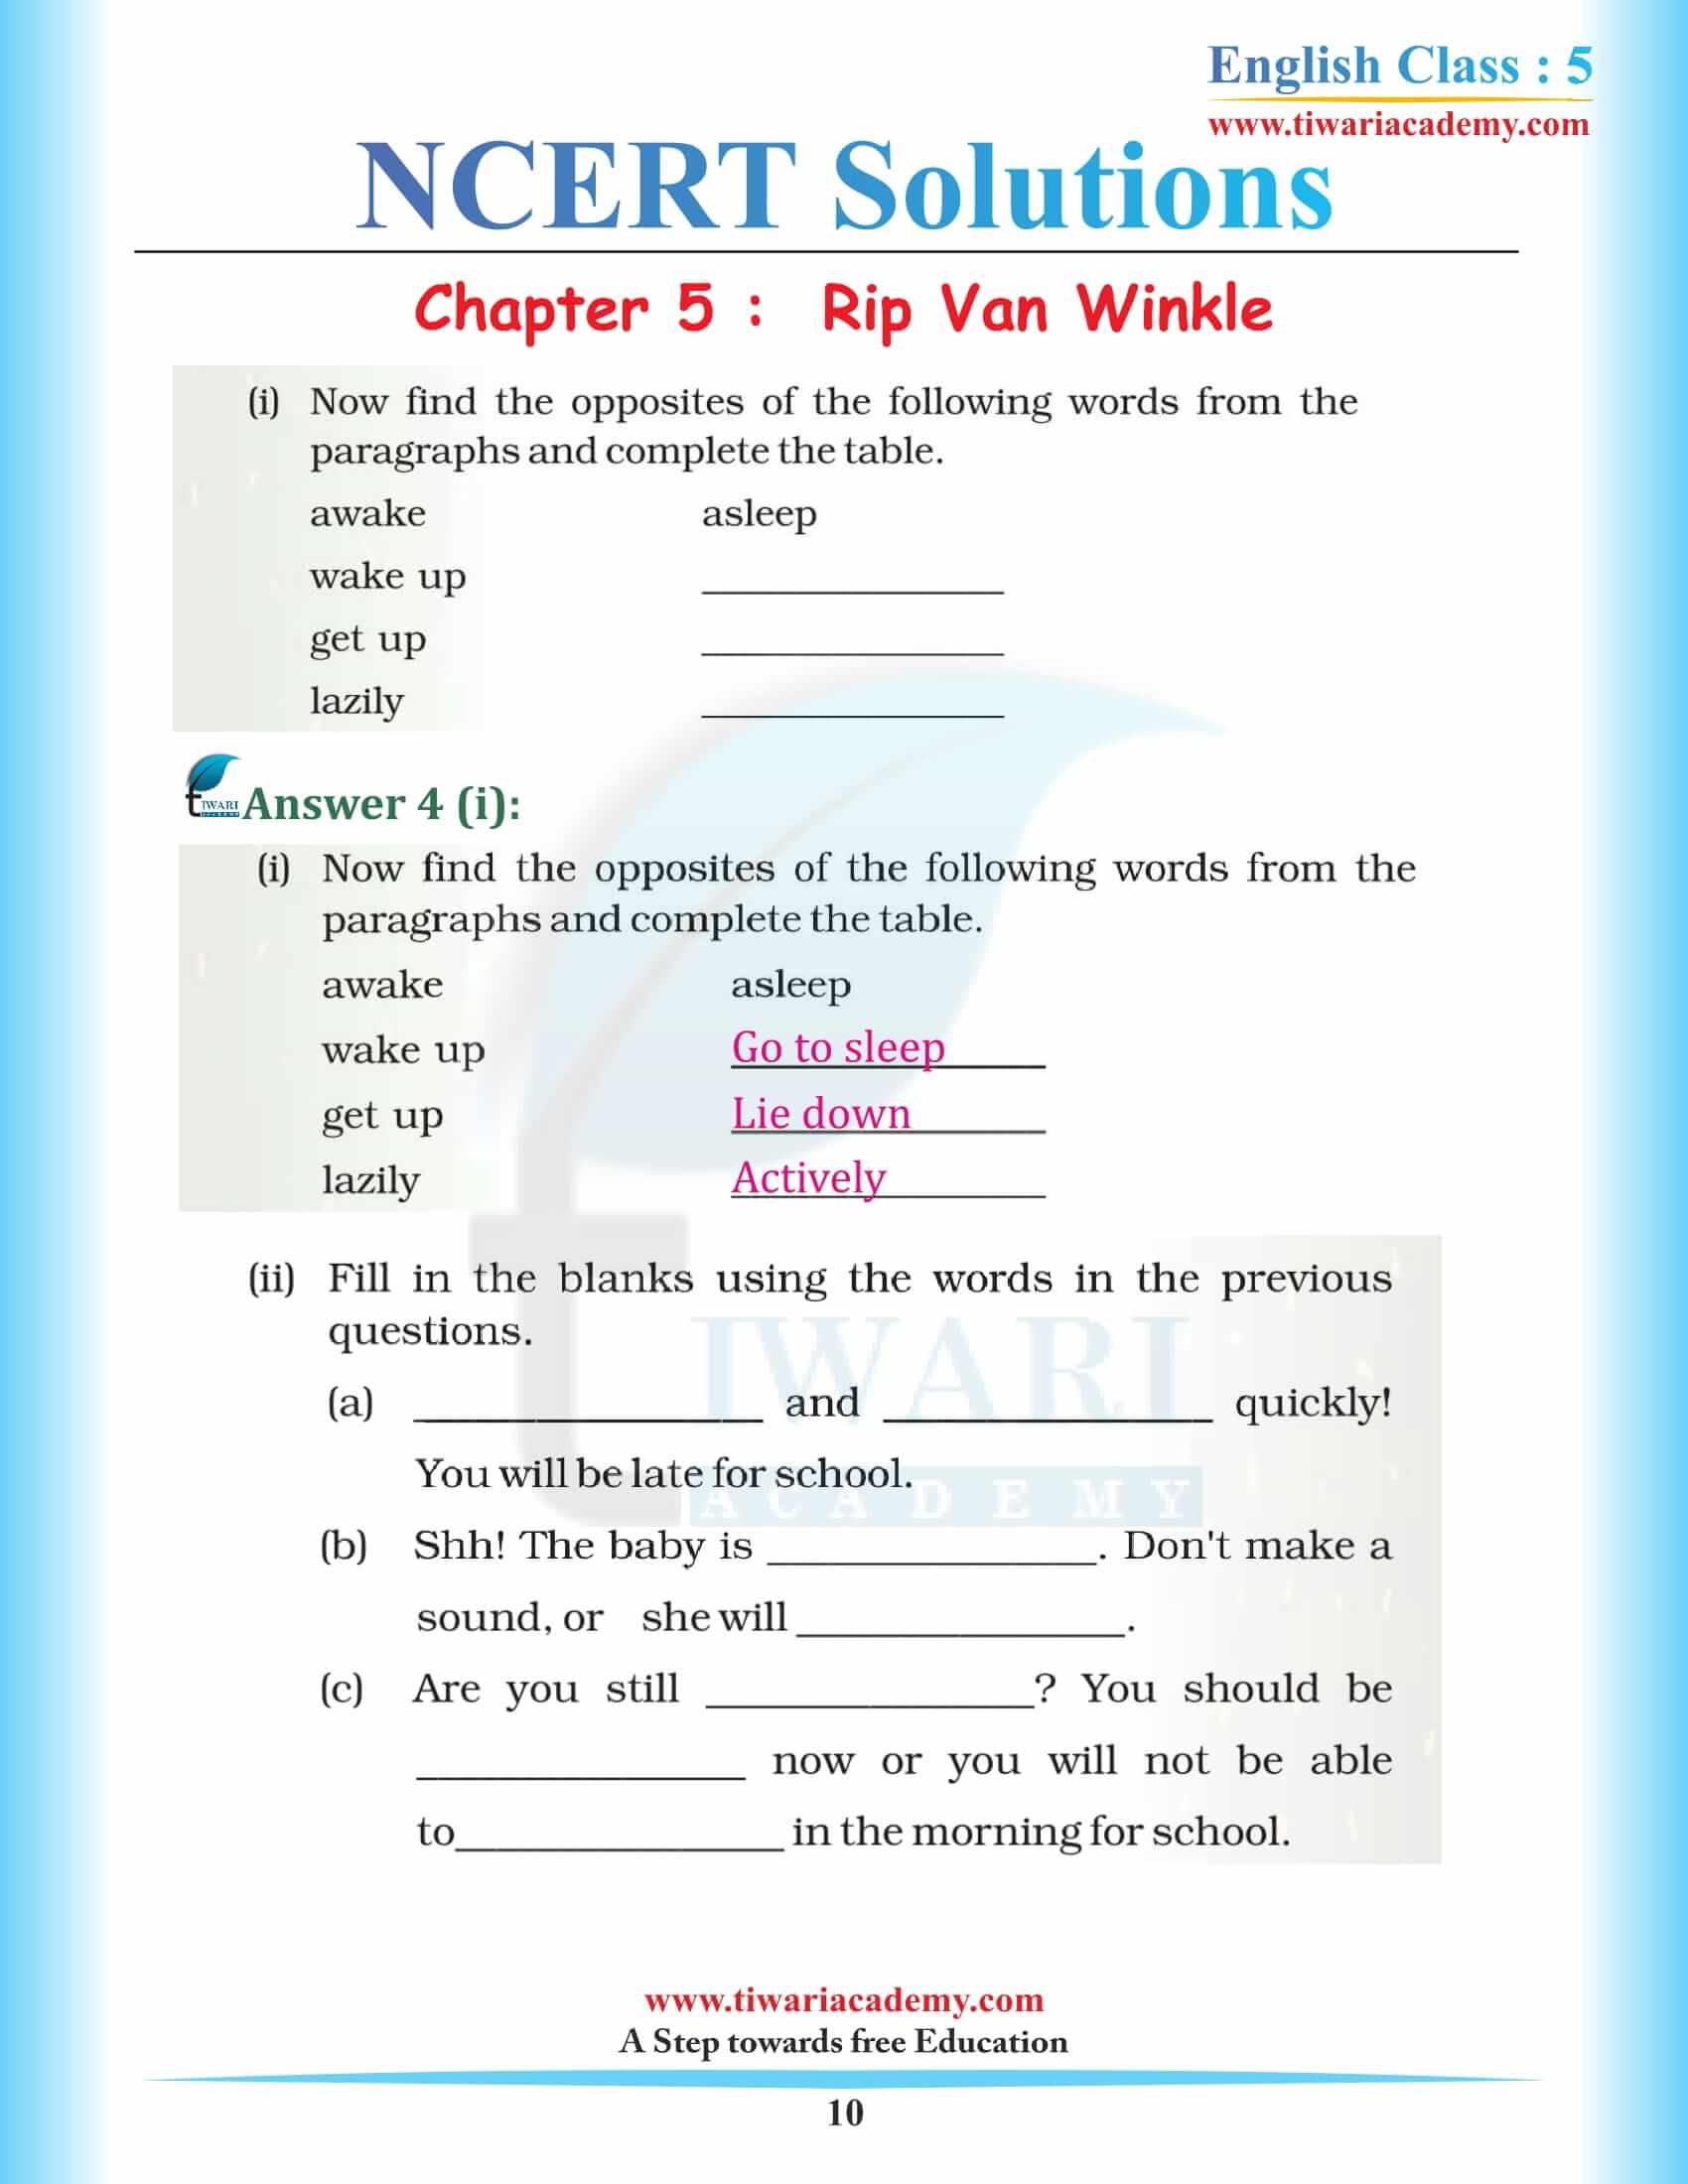 Class 5 English Chapter 5 Rip Van Winkle solutions